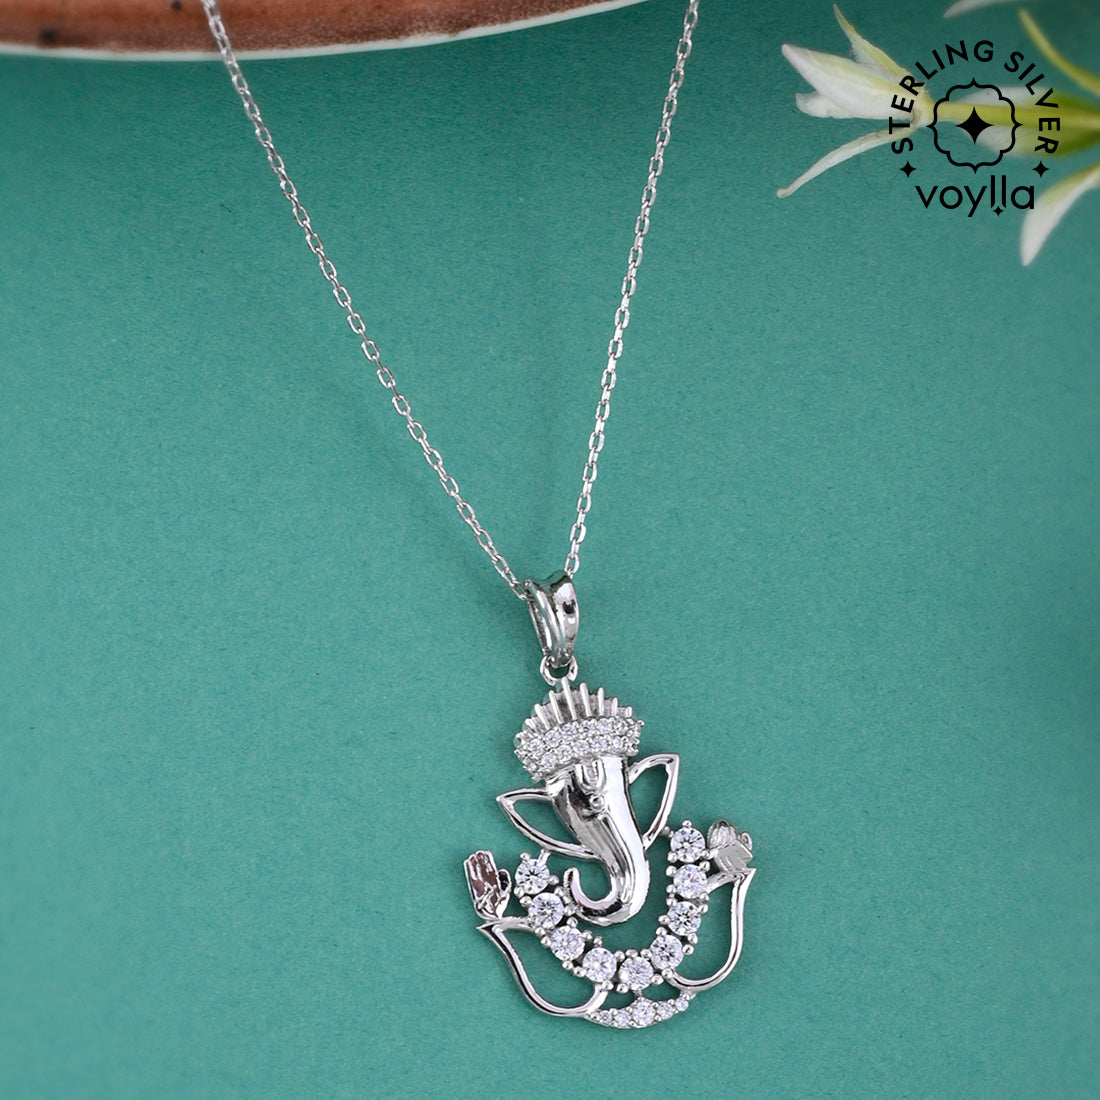 925 Sterling Silver CZ Ganesha Pendant with Chain